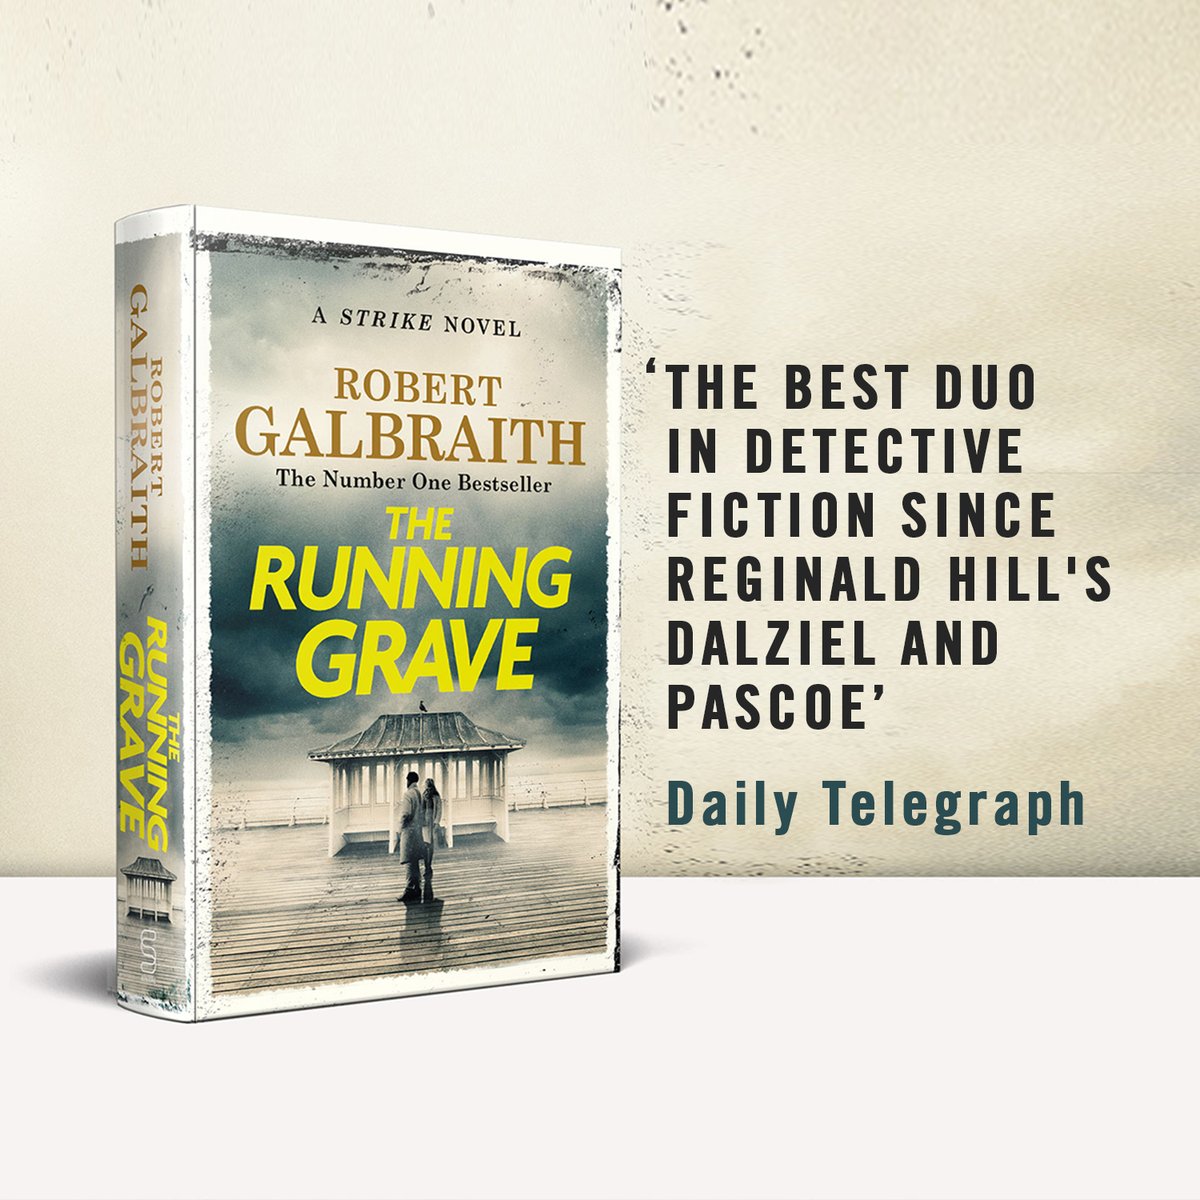 'Strike and Robin remain solid, convincingly drawn characters - the best duo in detective fiction since Reginald Hill's Dalziel and Pascoe' @Telegraph  Where do you think The Running Grave will lead this dynamic duo? #TheRunningGrave #RobertGalbraith